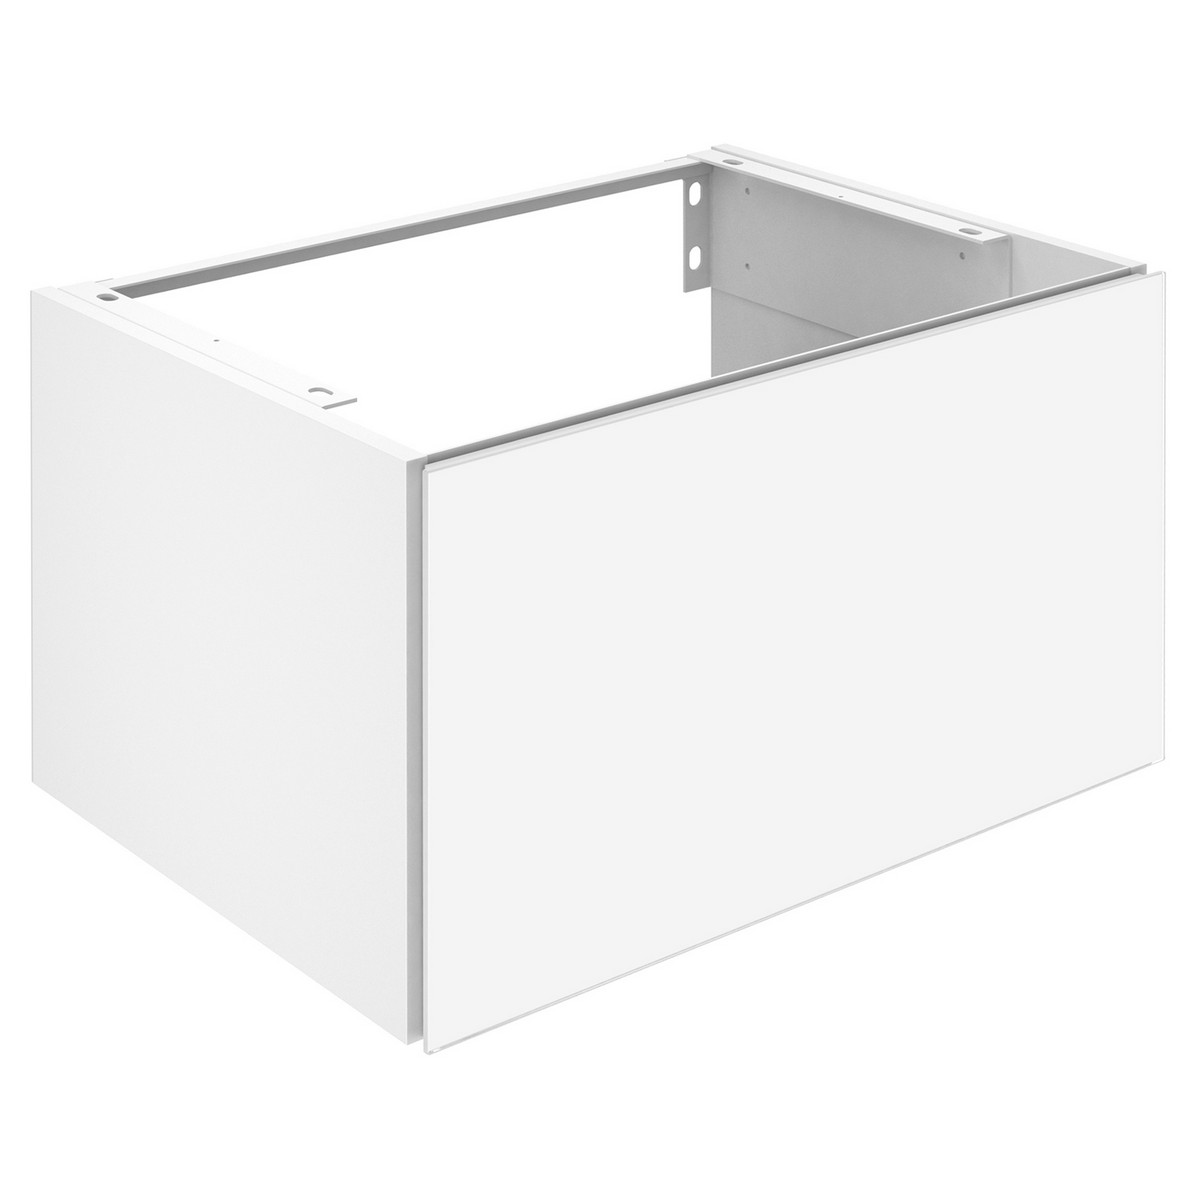 KEUCO 329510000 PLAN 25 5/8 INCH 1-DRAWER WALL MOUNTED SINGLE SINK BATHROOM VANITY CABINET ONLY